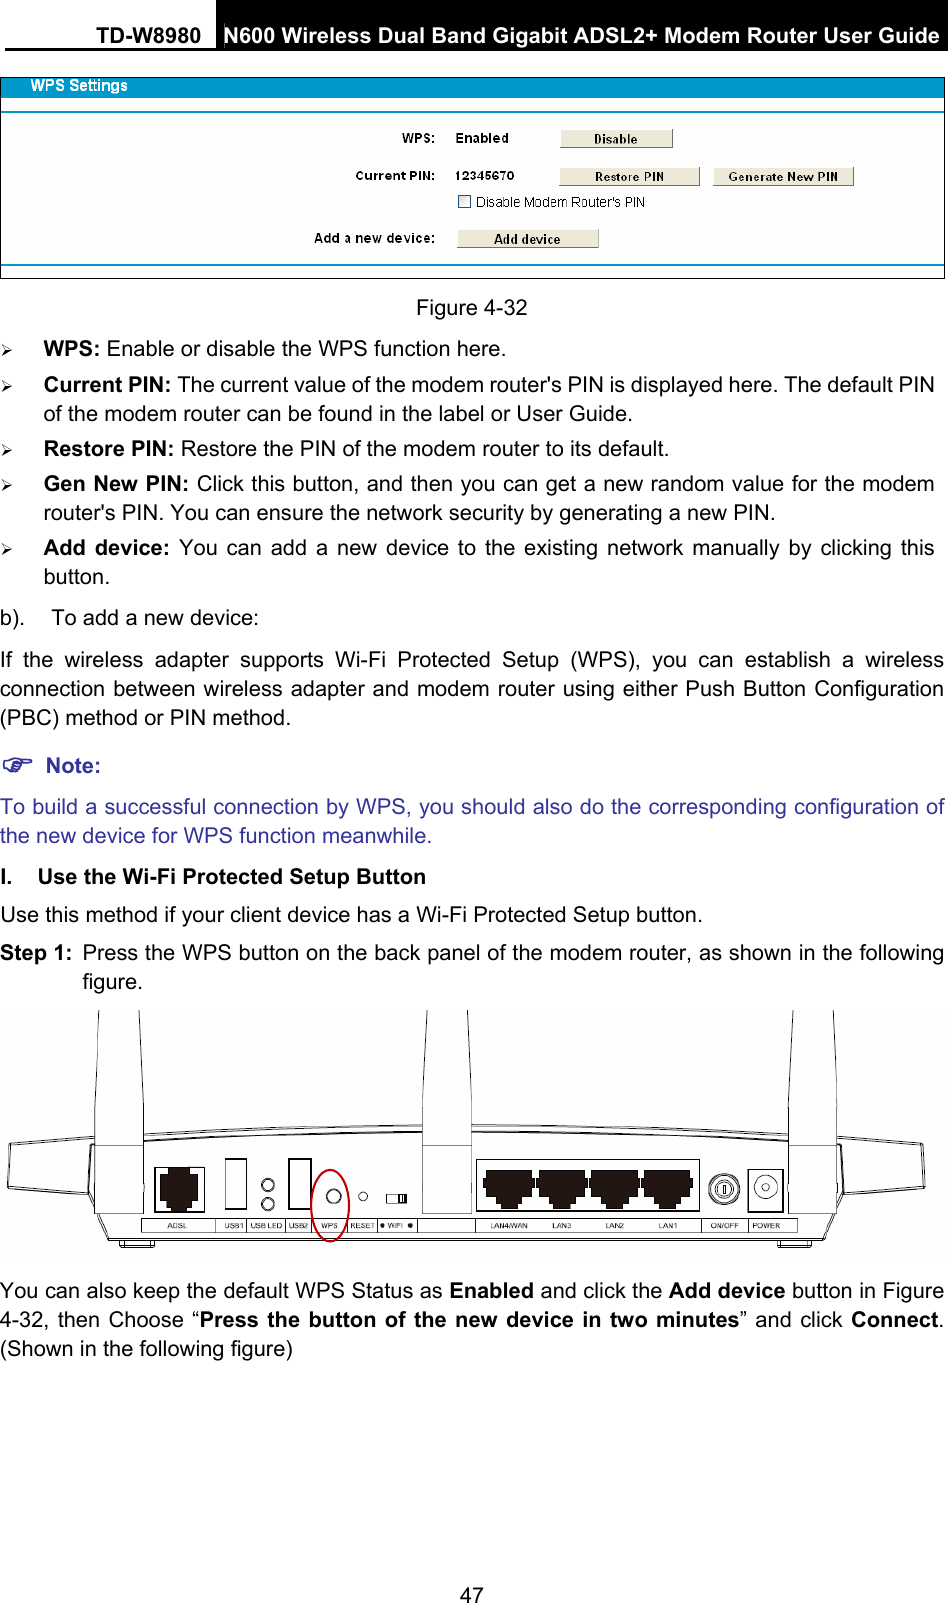 TD-W8980  N600 Wireless Dual Band Gigabit ADSL2+ Modem Router User Guide 47  Figure 4-32 ¾ WPS: Enable or disable the WPS function here.   ¾ Current PIN: The current value of the modem router&apos;s PIN is displayed here. The default PIN of the modem router can be found in the label or User Guide.   ¾ Restore PIN: Restore the PIN of the modem router to its default.   ¾ Gen New PIN: Click this button, and then you can get a new random value for the modem router&apos;s PIN. You can ensure the network security by generating a new PIN. ¾ Add device: You can add a new device to the existing network manually by clicking this button. b).  To add a new device: If the wireless adapter supports Wi-Fi Protected Setup (WPS), you can establish a wireless connection between wireless adapter and modem router using either Push Button Configuration (PBC) method or PIN method. ) Note: To build a successful connection by WPS, you should also do the corresponding configuration of the new device for WPS function meanwhile. I.  Use the Wi-Fi Protected Setup Button Use this method if your client device has a Wi-Fi Protected Setup button. Step 1:  Press the WPS button on the back panel of the modem router, as shown in the following figure.  You can also keep the default WPS Status as Enabled and click the Add device button in Figure 4-32, then Choose “Press the button of the new device in two minutes” and click Connect. (Shown in the following figure) 